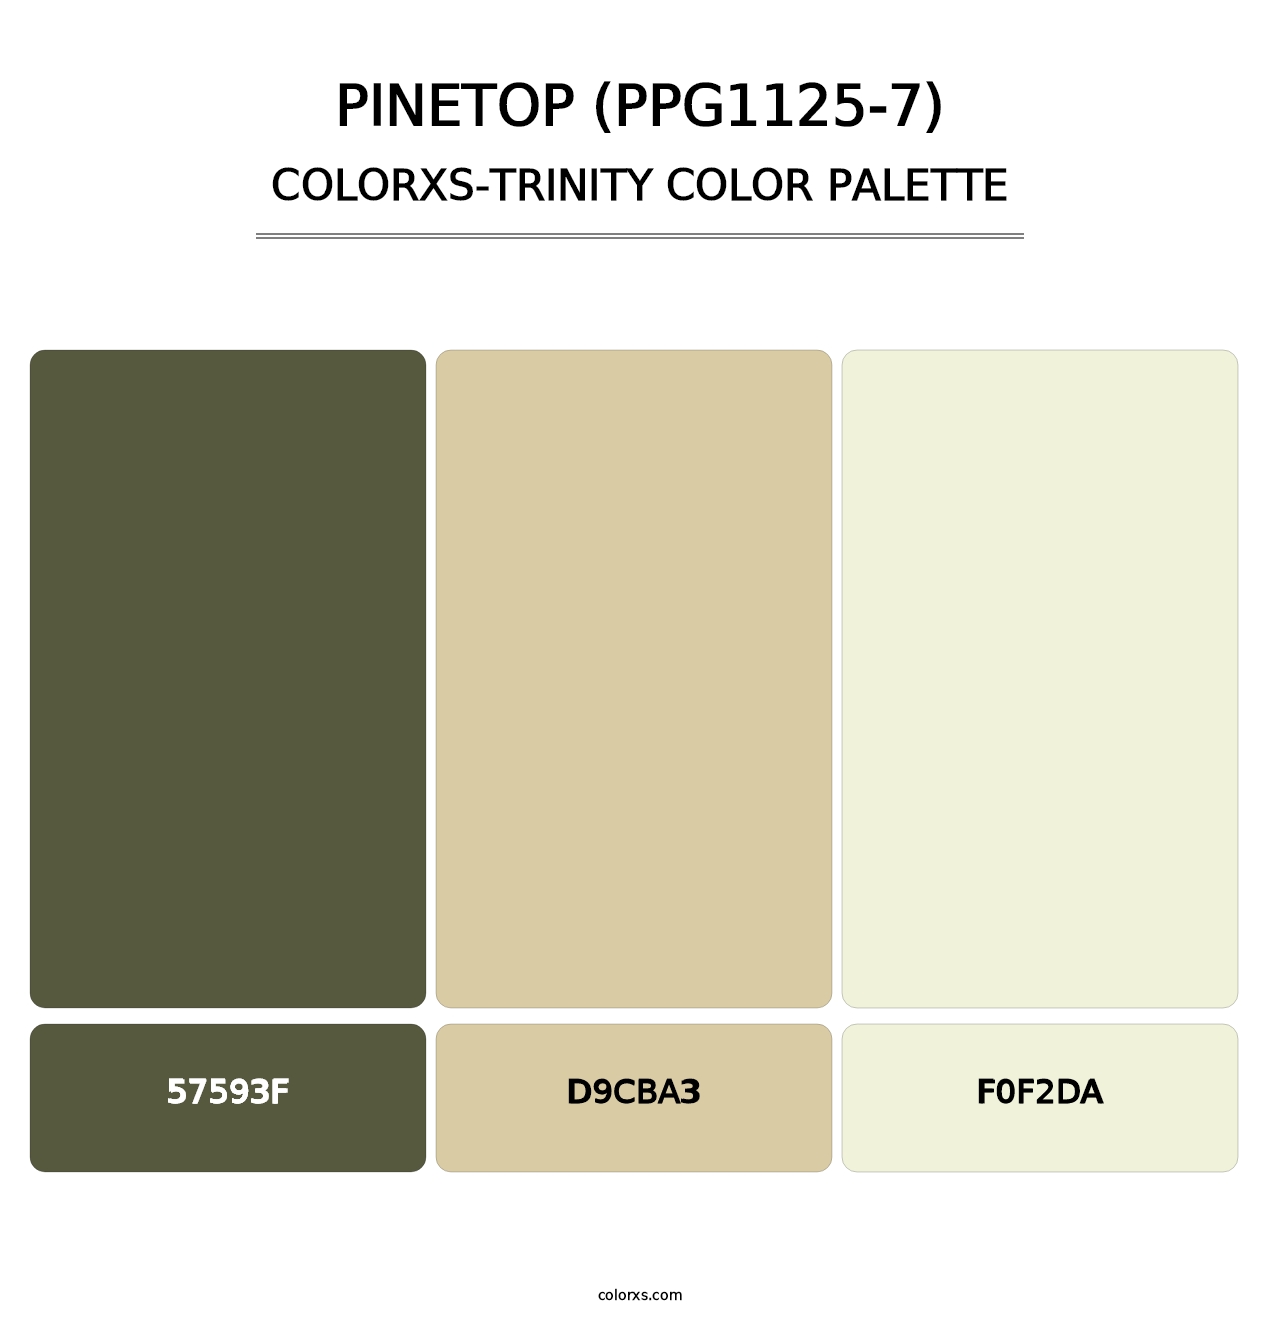 Pinetop (PPG1125-7) - Colorxs Trinity Palette